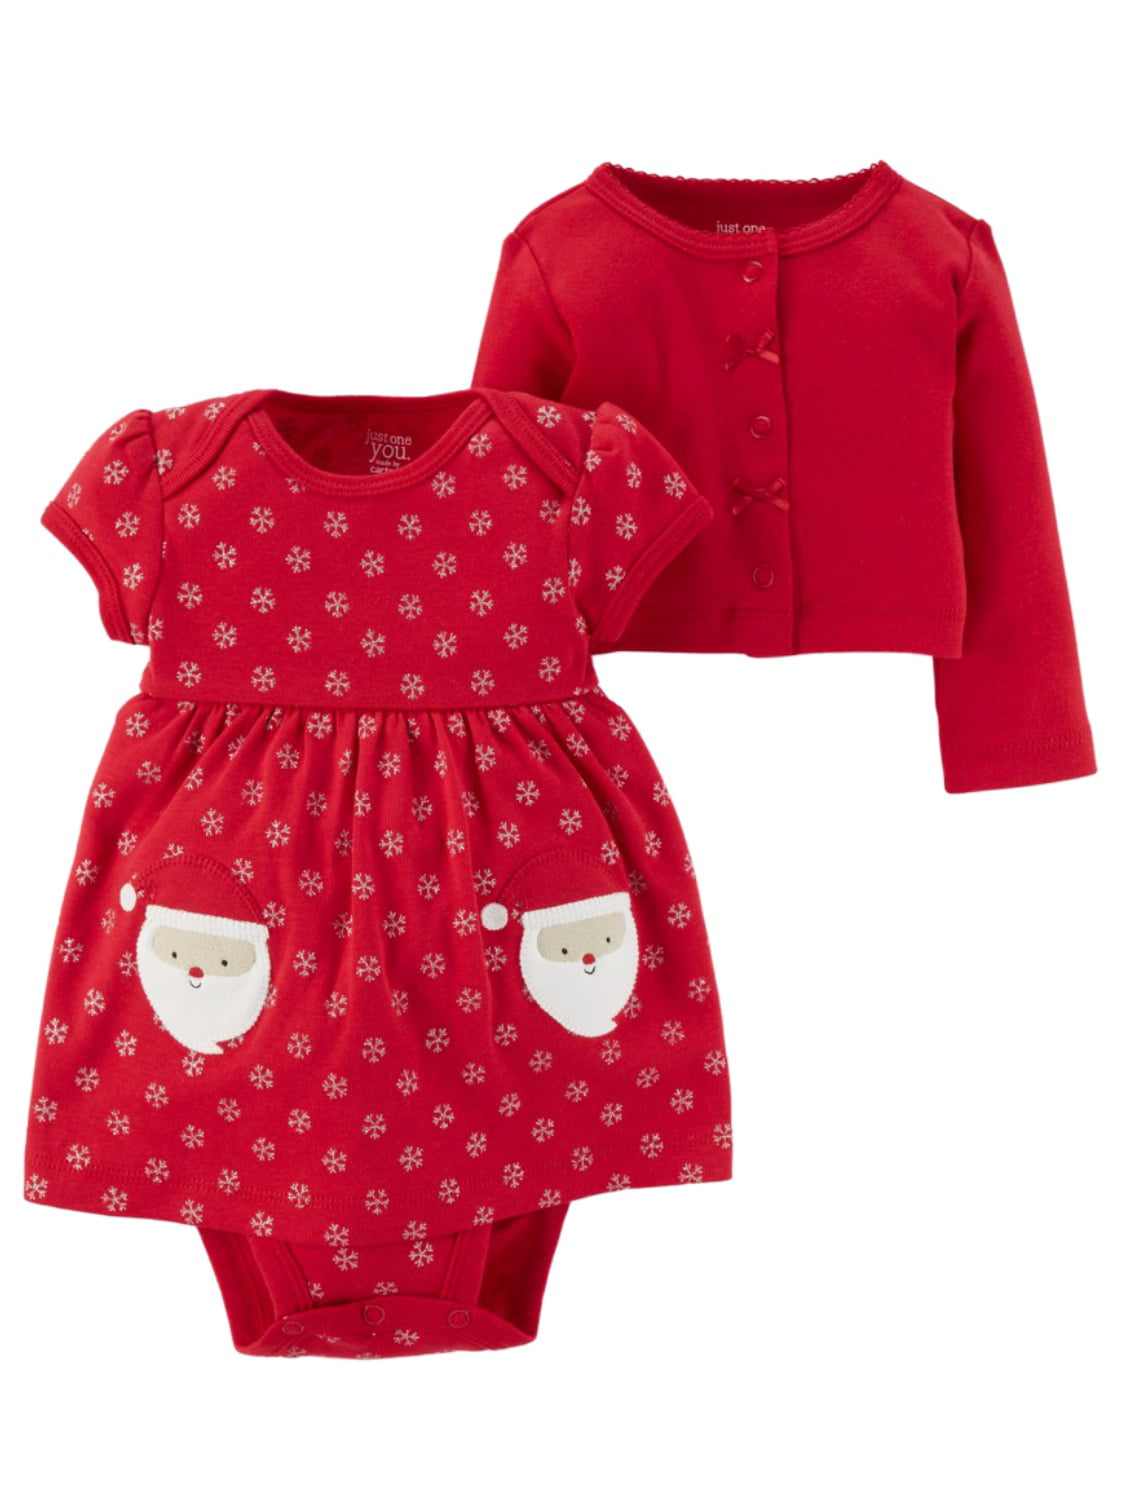 Details about   NWT Cater's Baby girls Santa Christmas costume 3 piece pajama set 24months Red